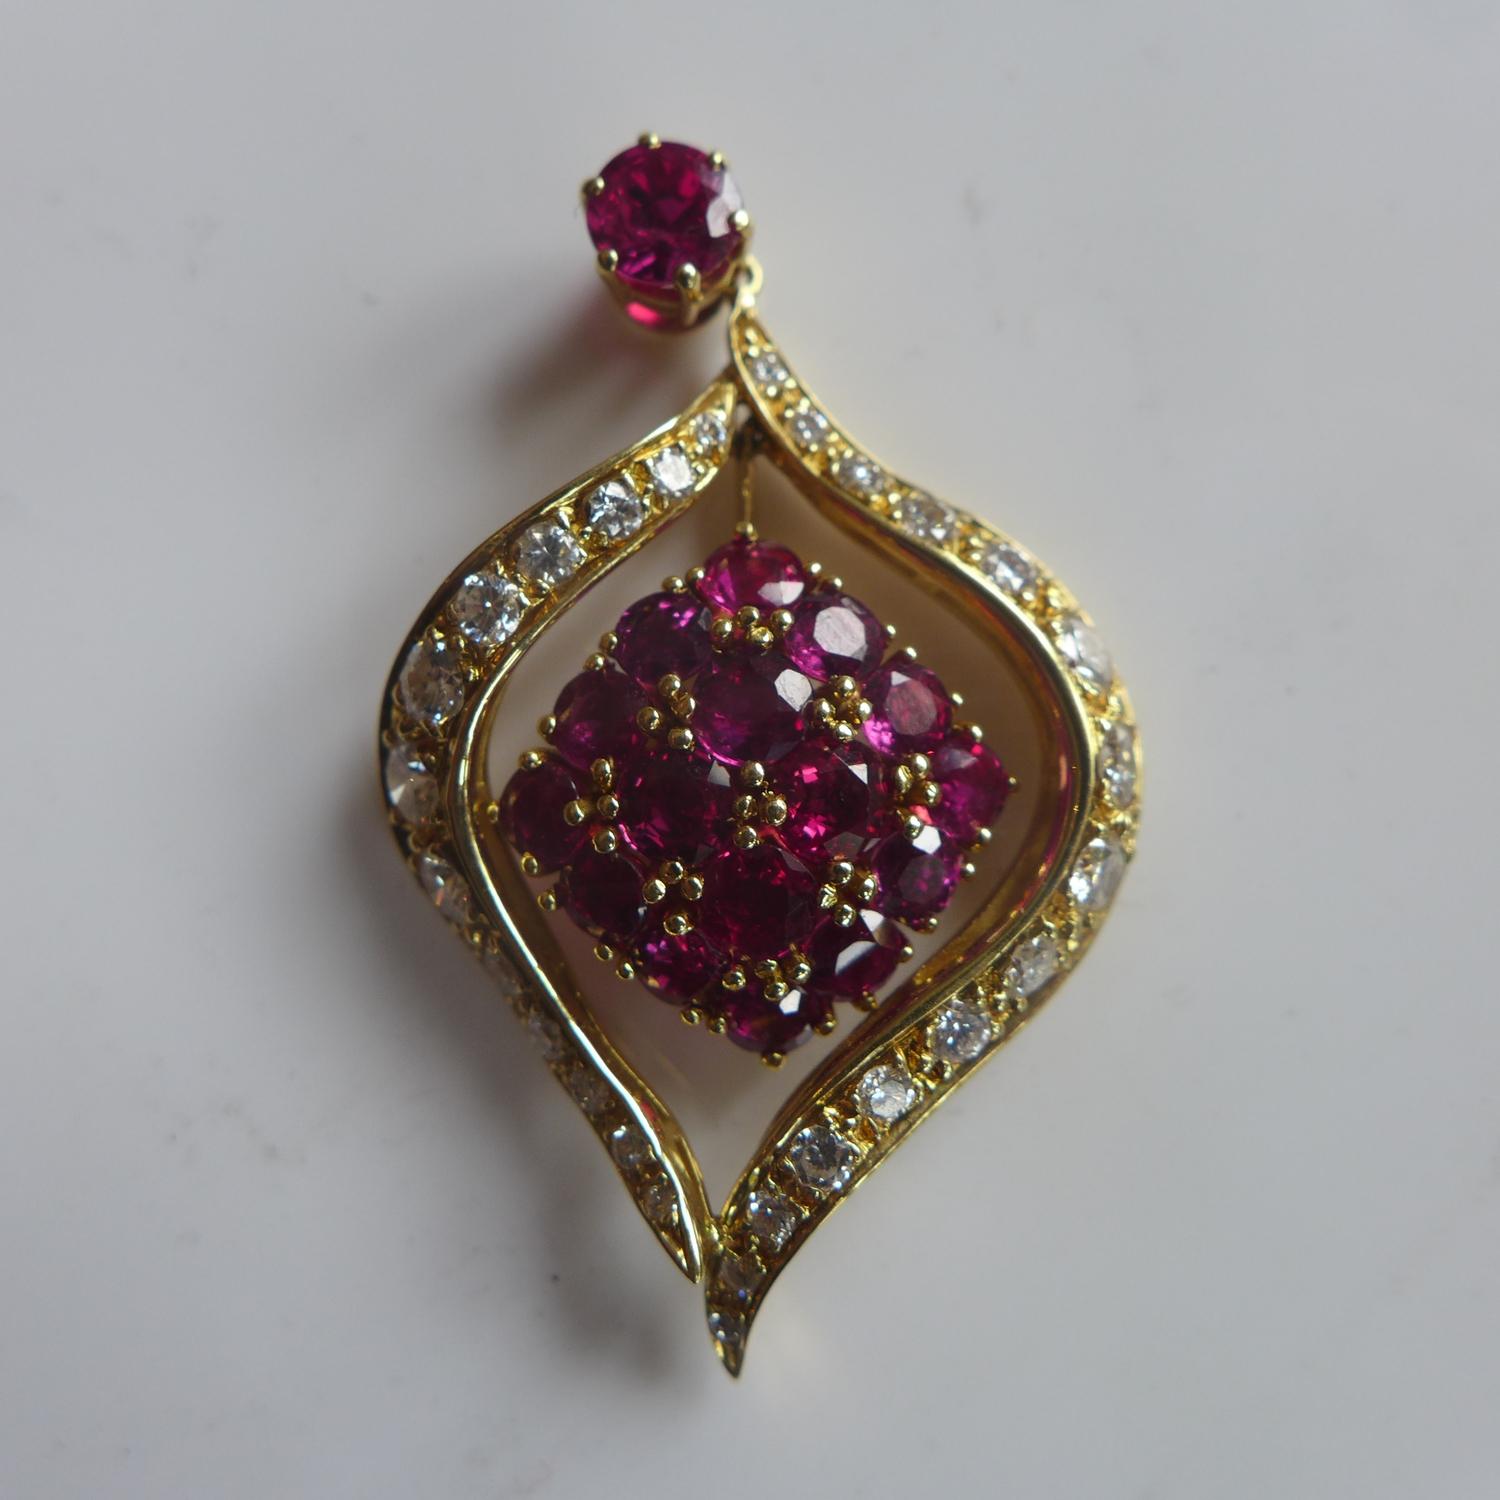 An 18ct yellow gold pendant, a single ruby above the leaf shape drop pendant being inset with - Image 2 of 2